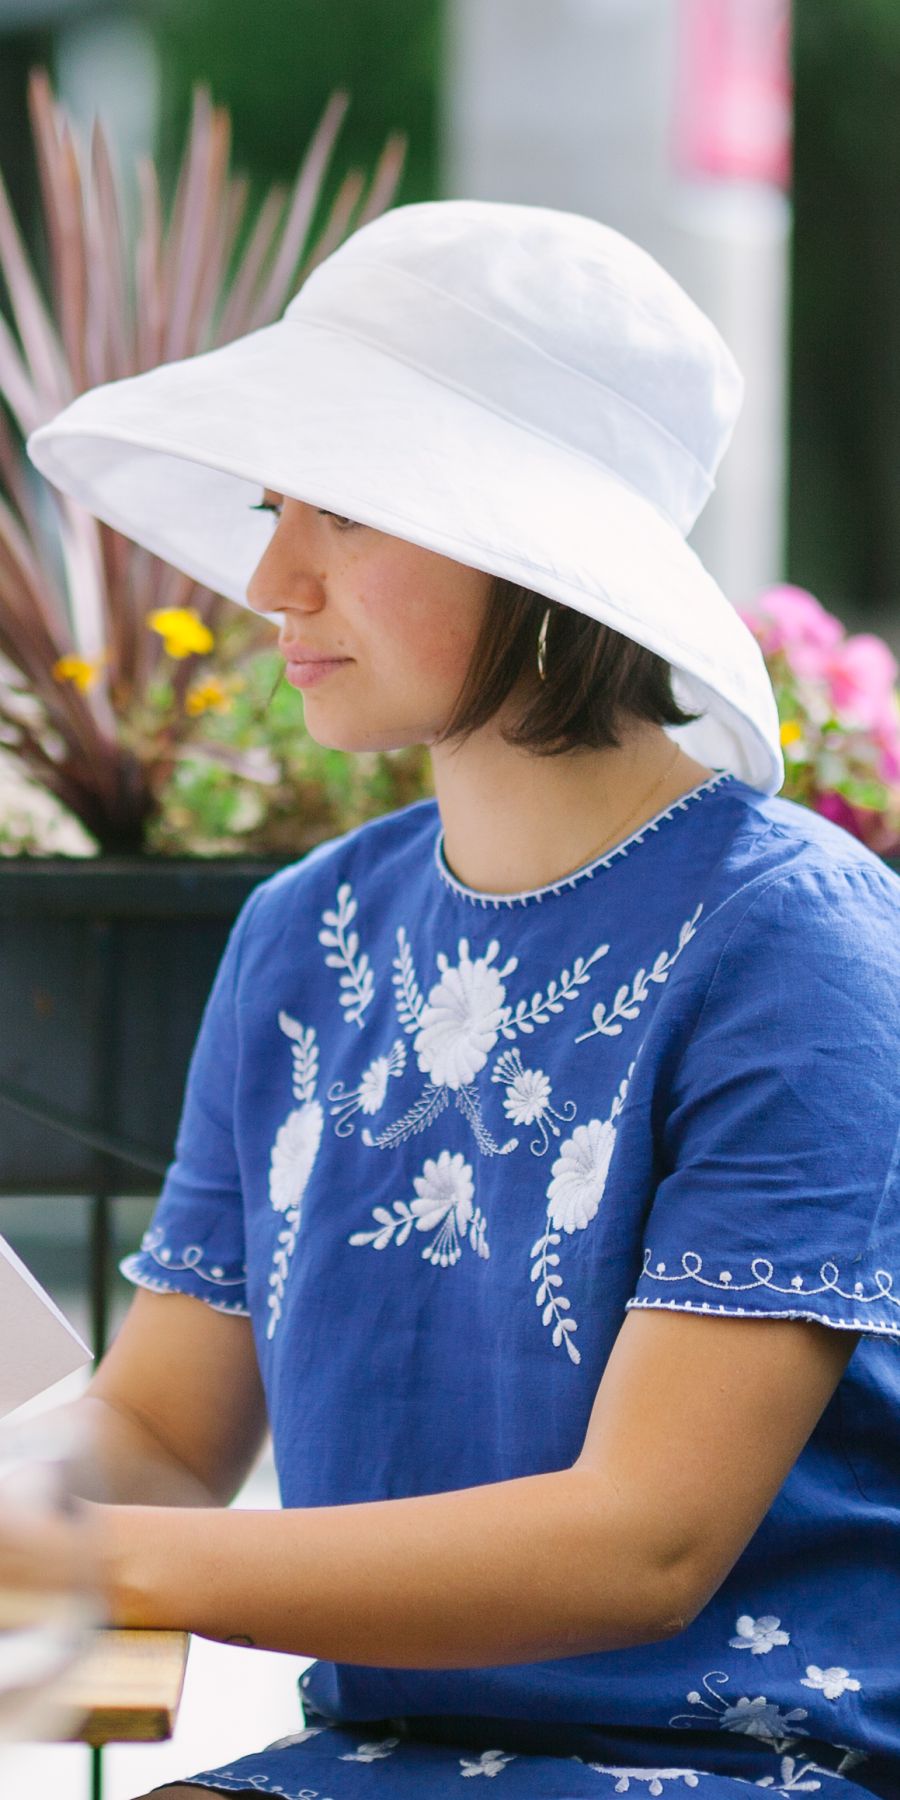 Lightweight linen hats by Puffin Gear are cool on the hottest of days and provide UPF50+ sunprotection.  Choose from wide brims for maximum sun protection or narrow brim bucket hats. Made in Canada. UPF50 Sun Protection.